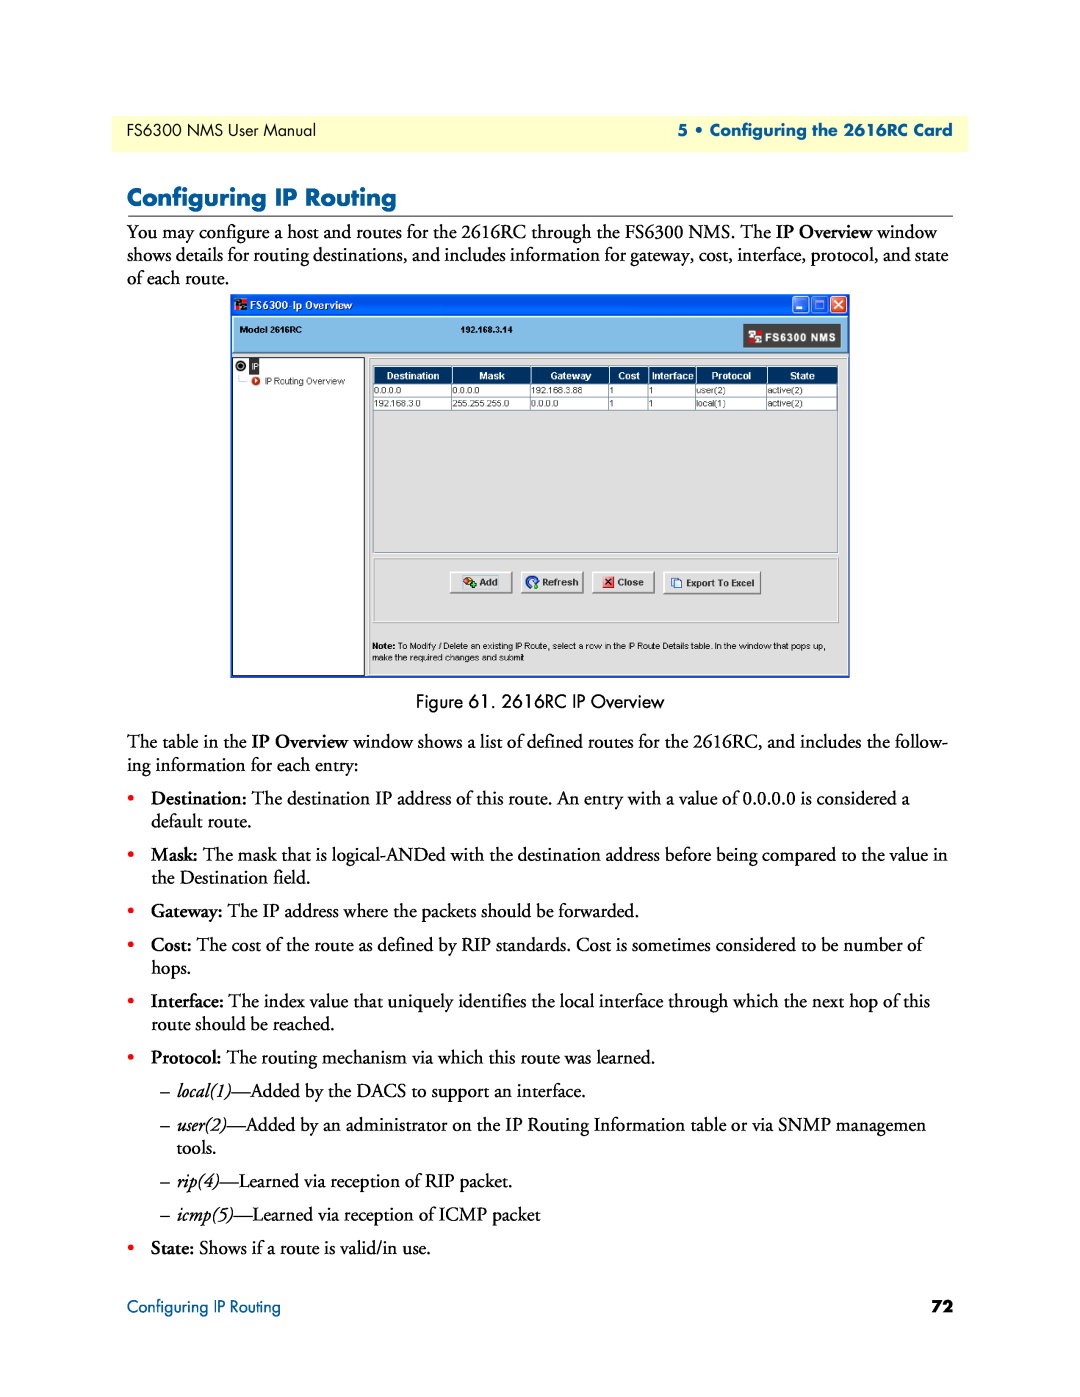 Patton electronic 6300 user manual Configuring IP Routing 